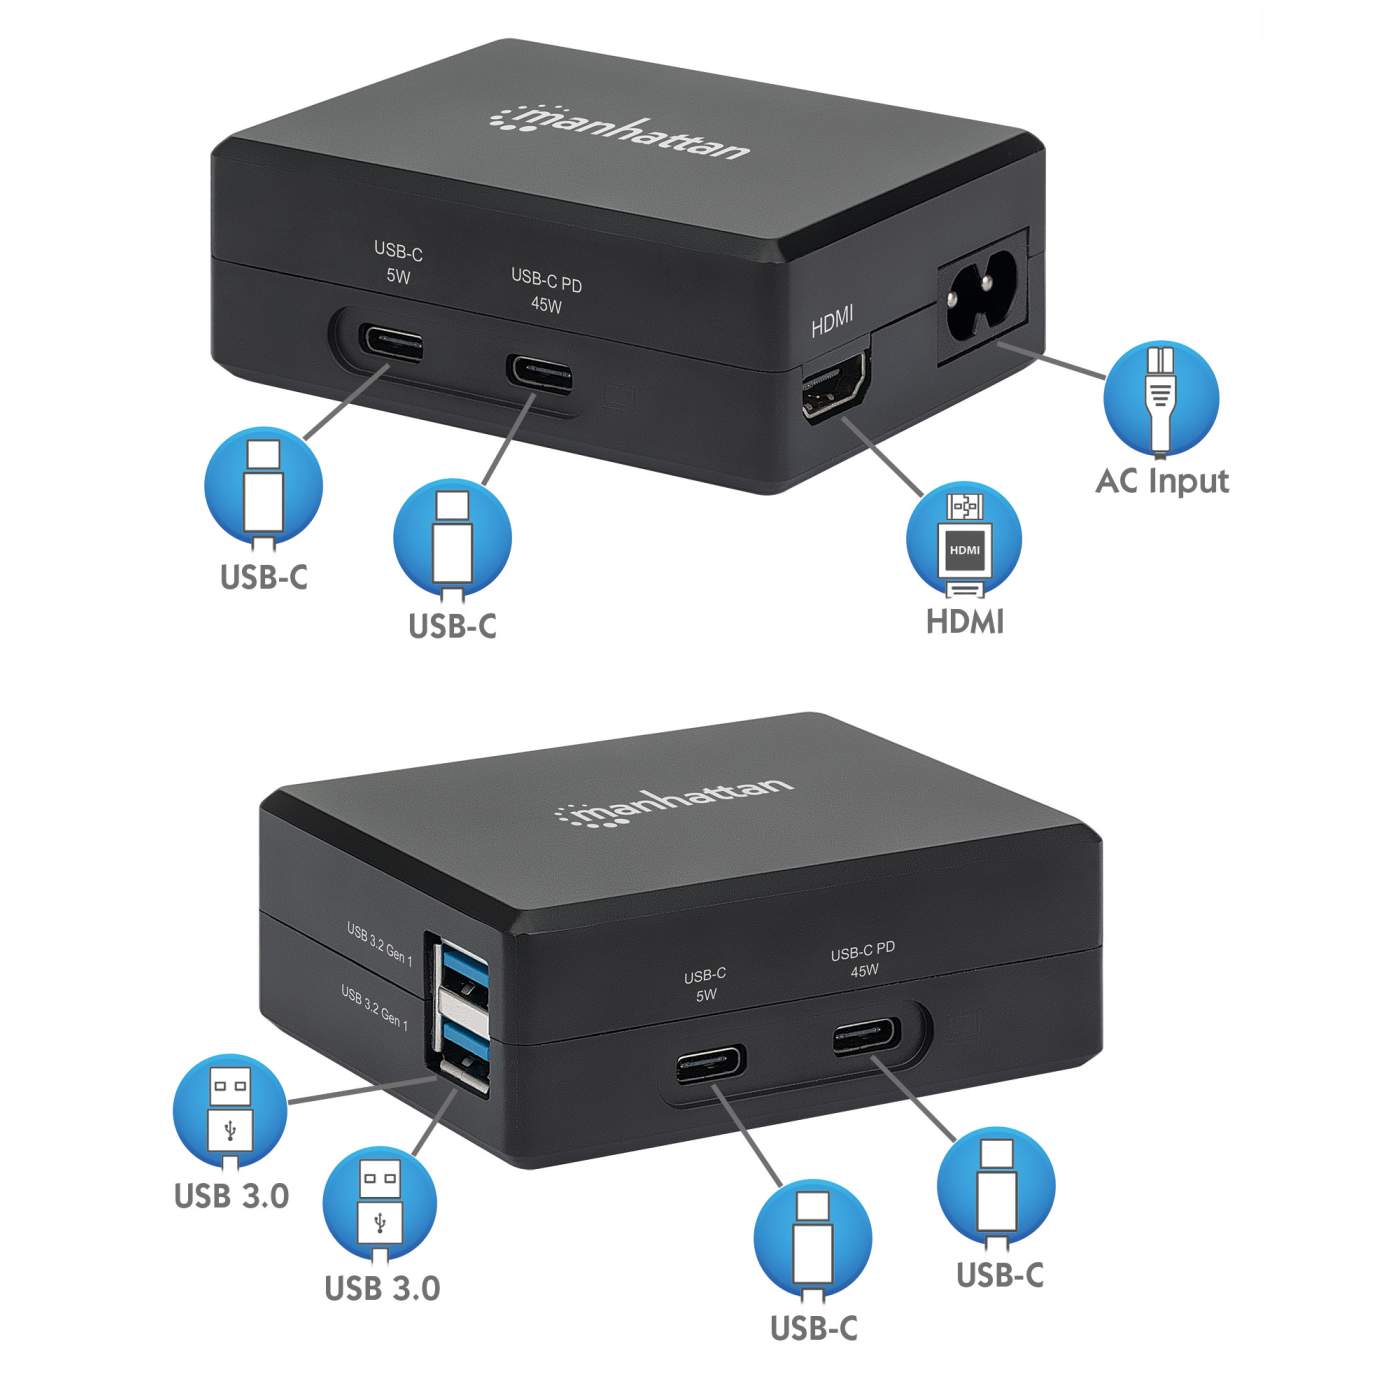 https://manhattanproducts.us/cdn/shop/products/usb-c-pd-charger-45-w-and-usb-c-to-hdmi-multiport-dock-with-2-x-usb-c-and-2-x-usb-a-ports-compact-travel-docking-station-with-internal-power-supply-for-chomebook-surface-laptop-130554_37321e6c-c147-44d6-a50b-35f25d805c48.jpg?v=1682079439&width=1400